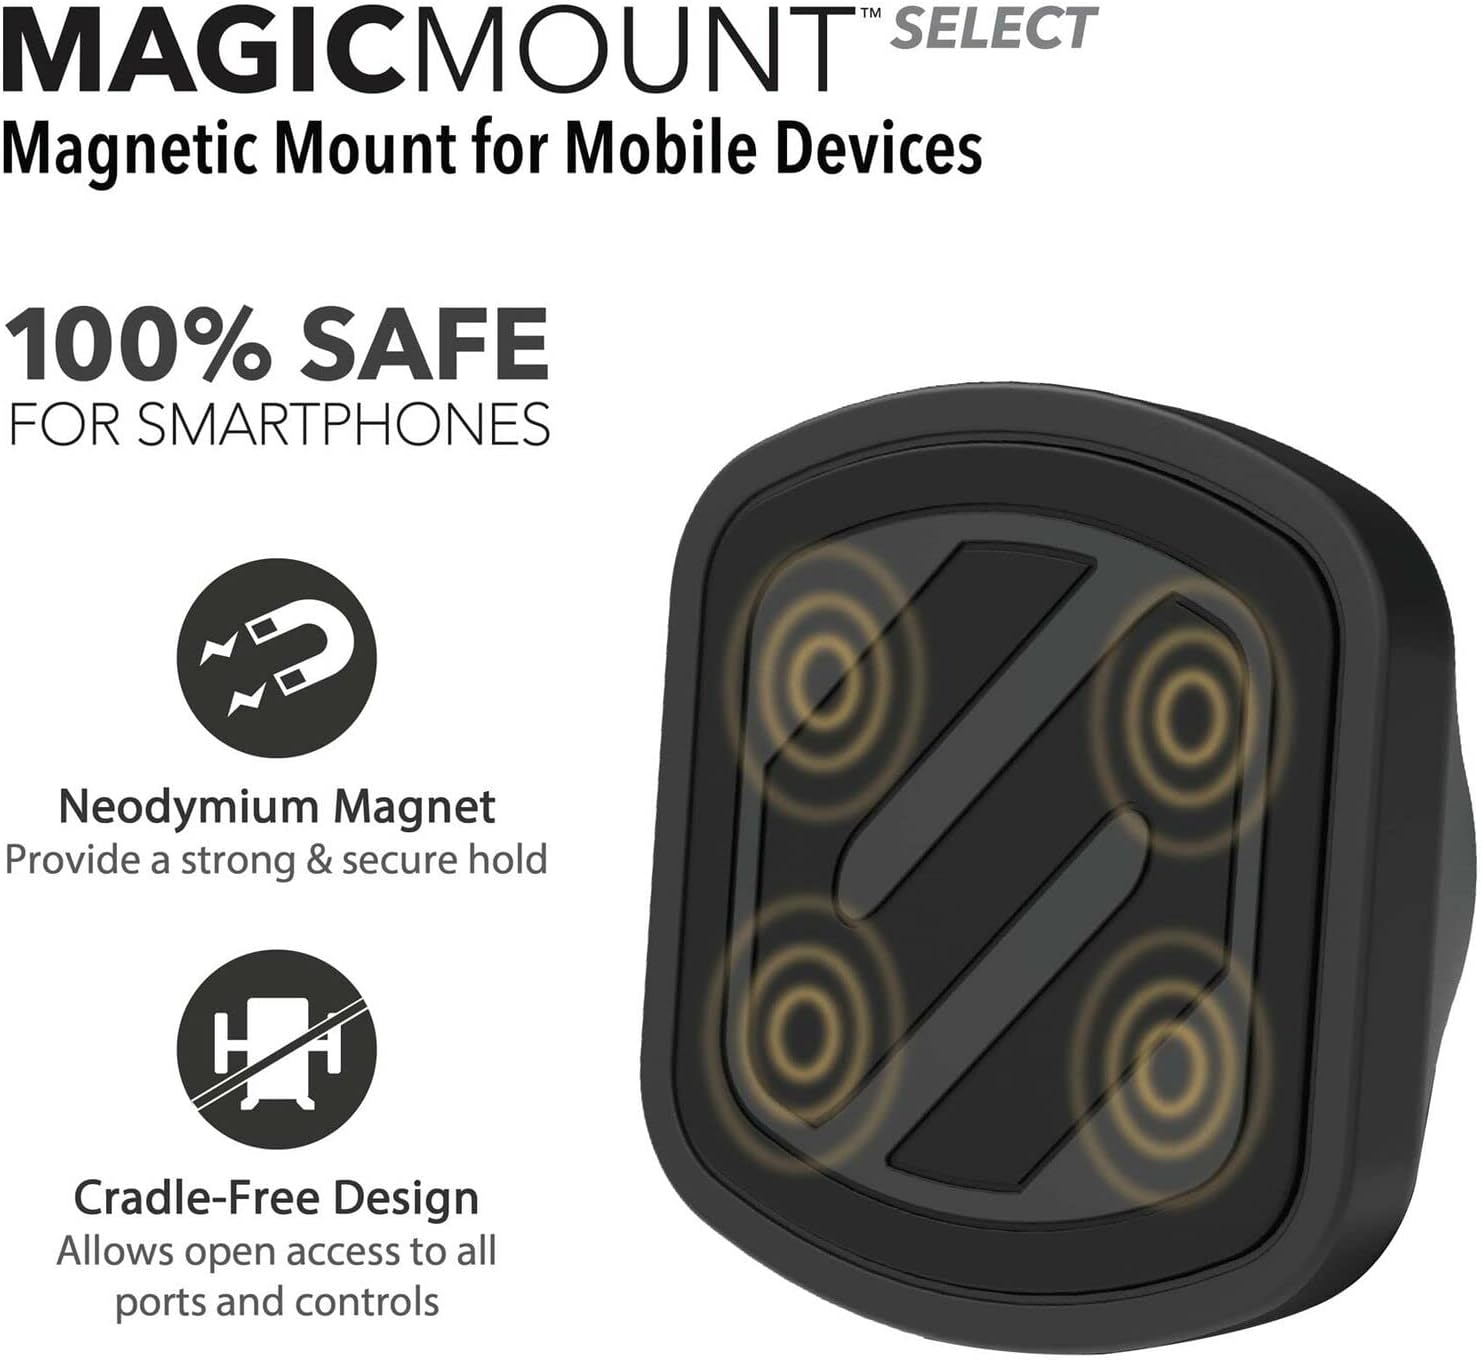 Scosche MagicMount Select Magnetic Car Dash Mount for Cell Phones - BLACK